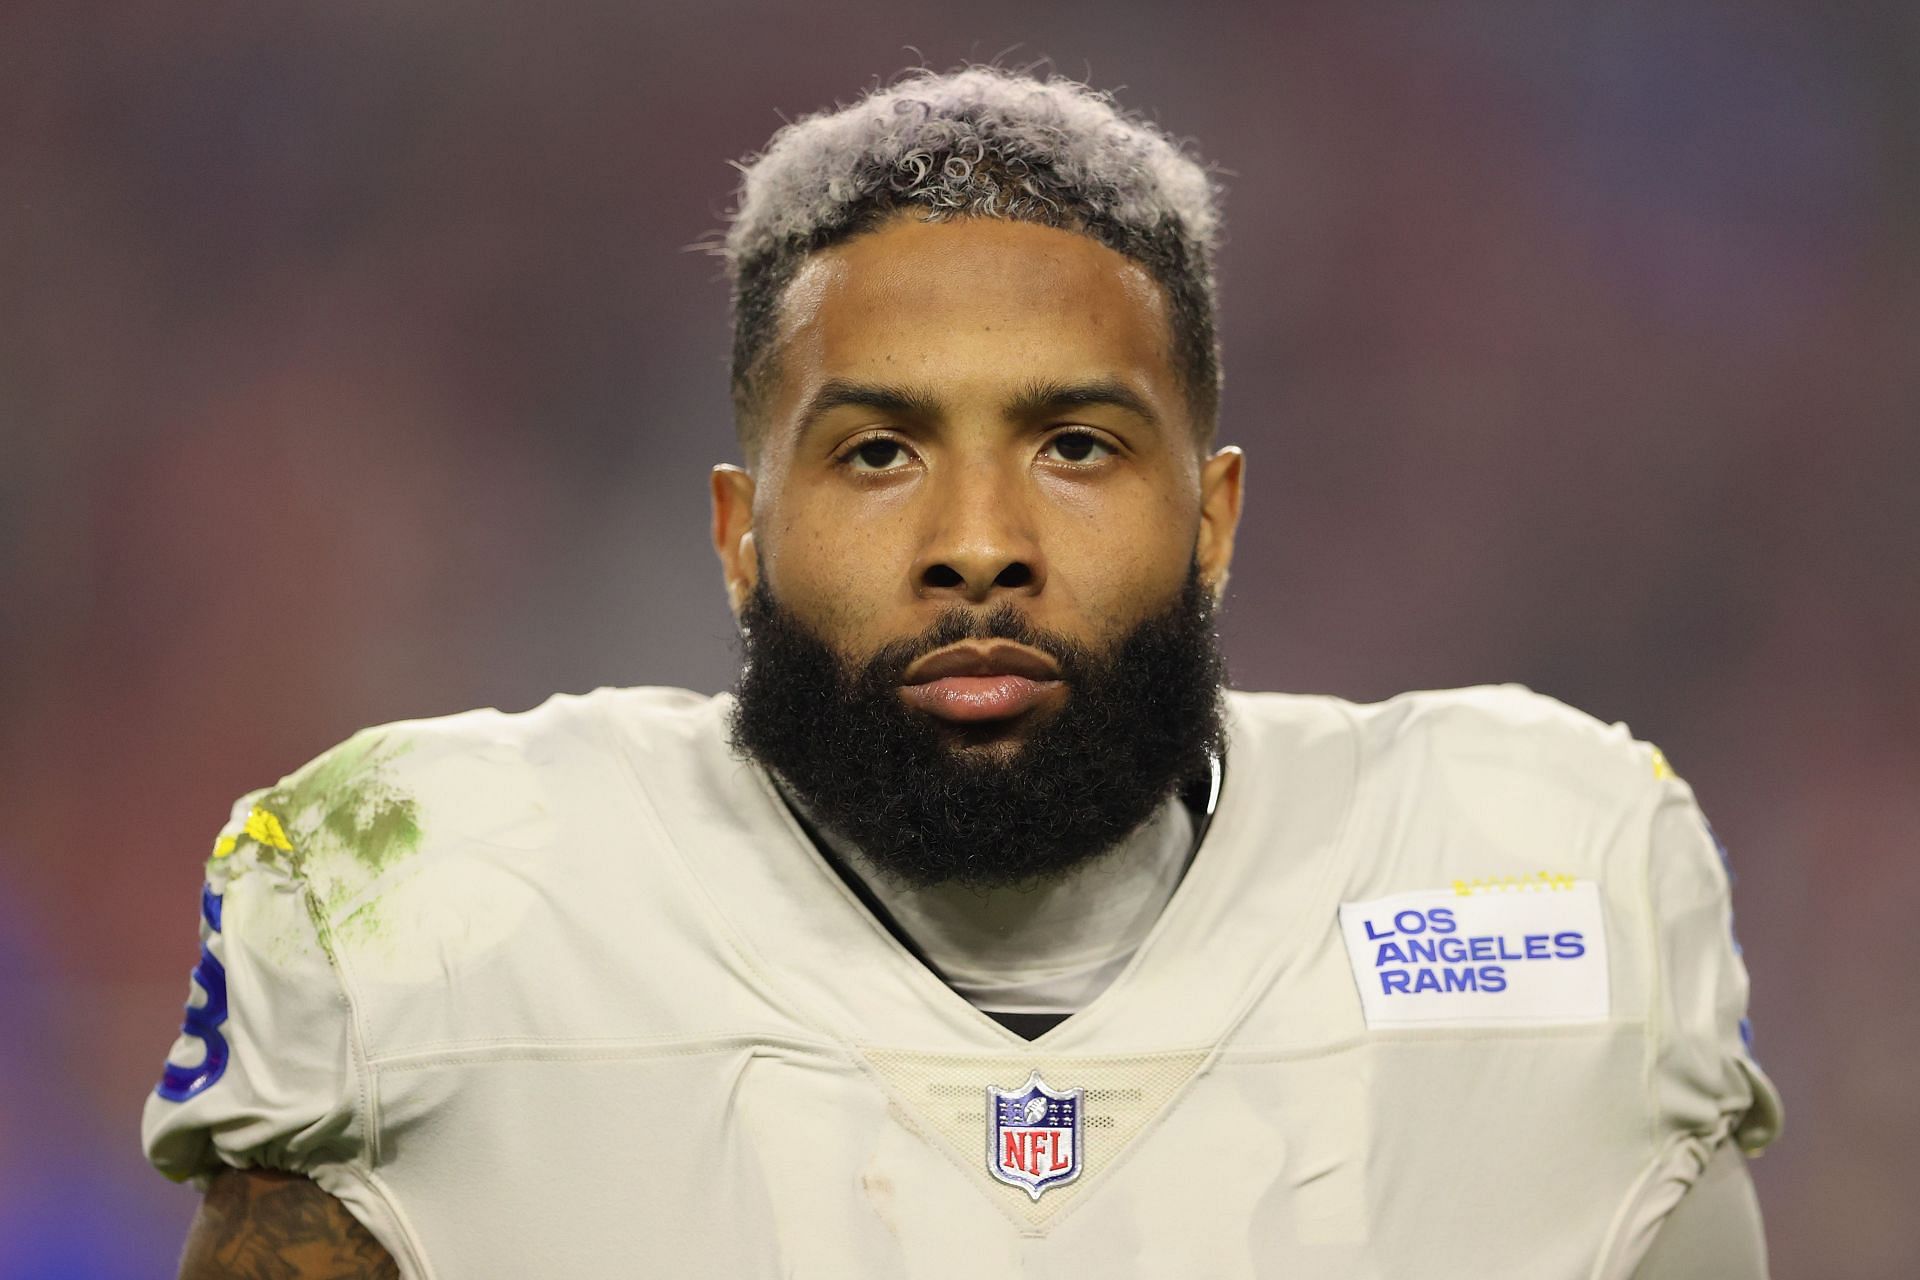 Odell Beckham thought about retirement after knee injury